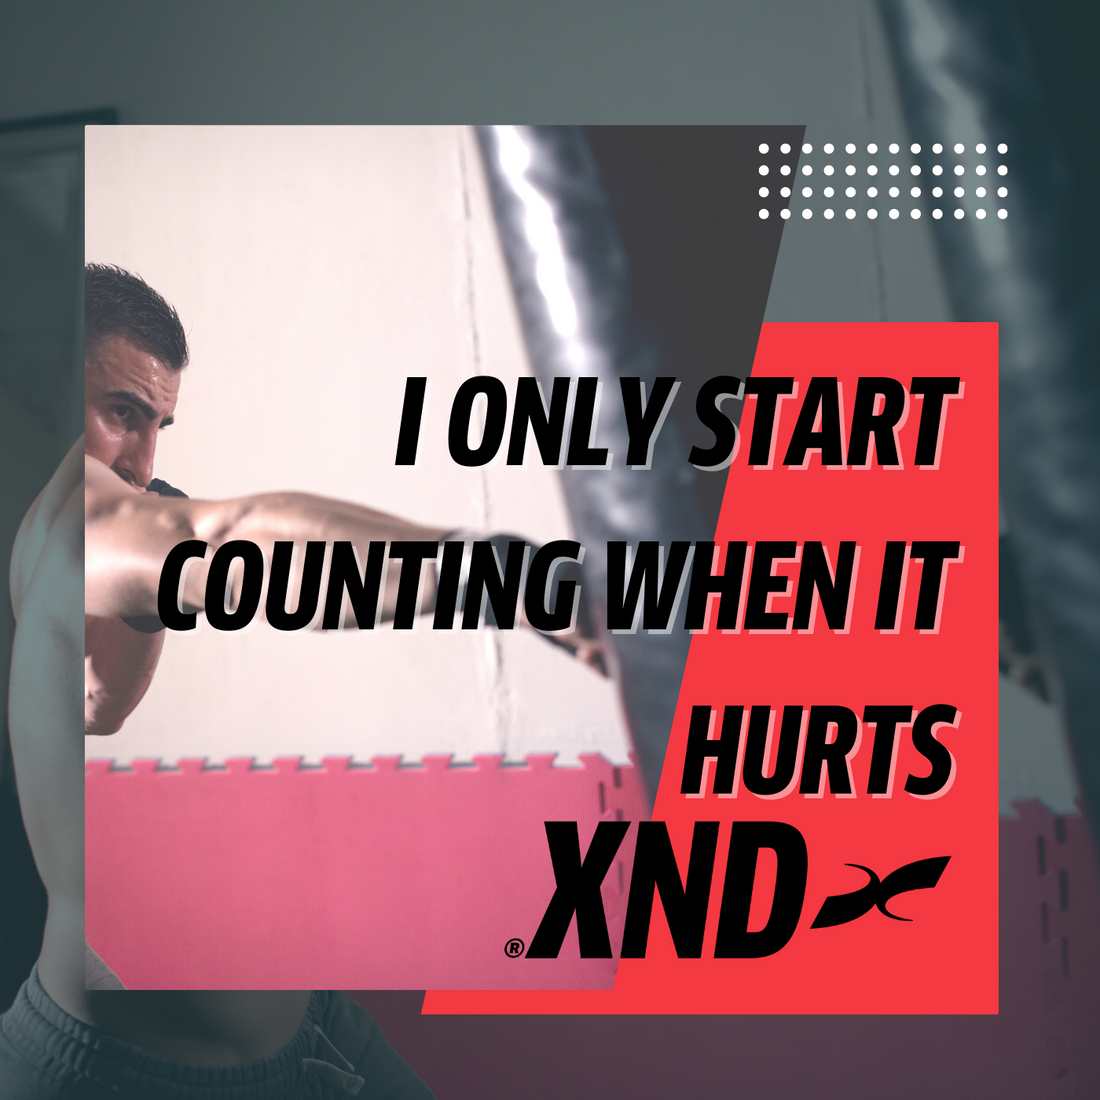 I only start counting when it hurts!